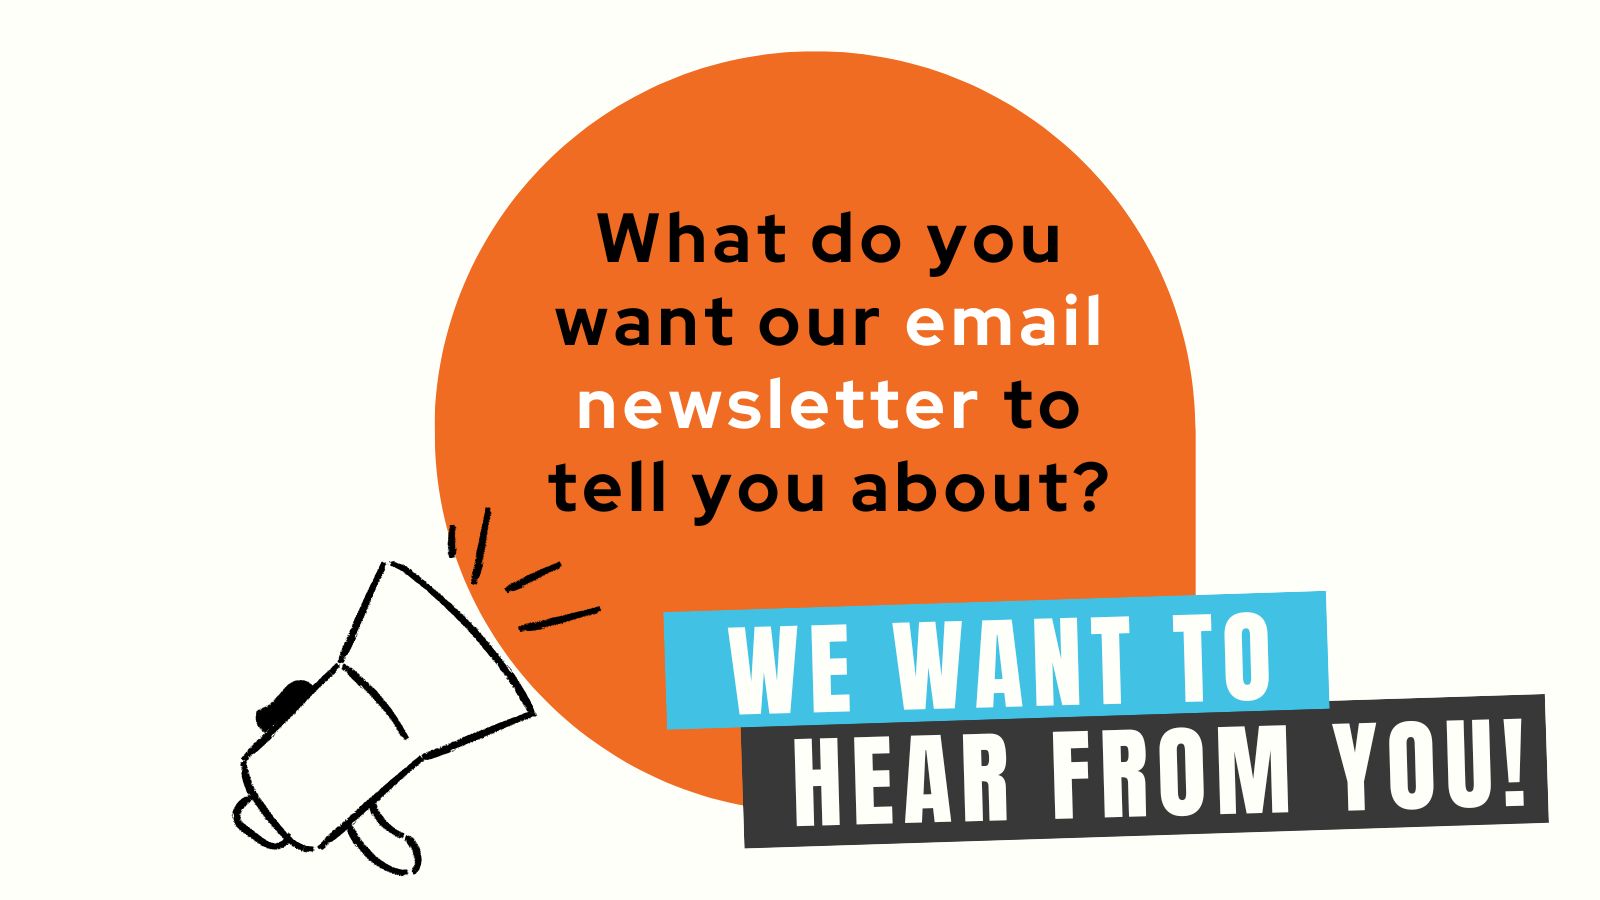 Tell us what you think about our email newsletter.